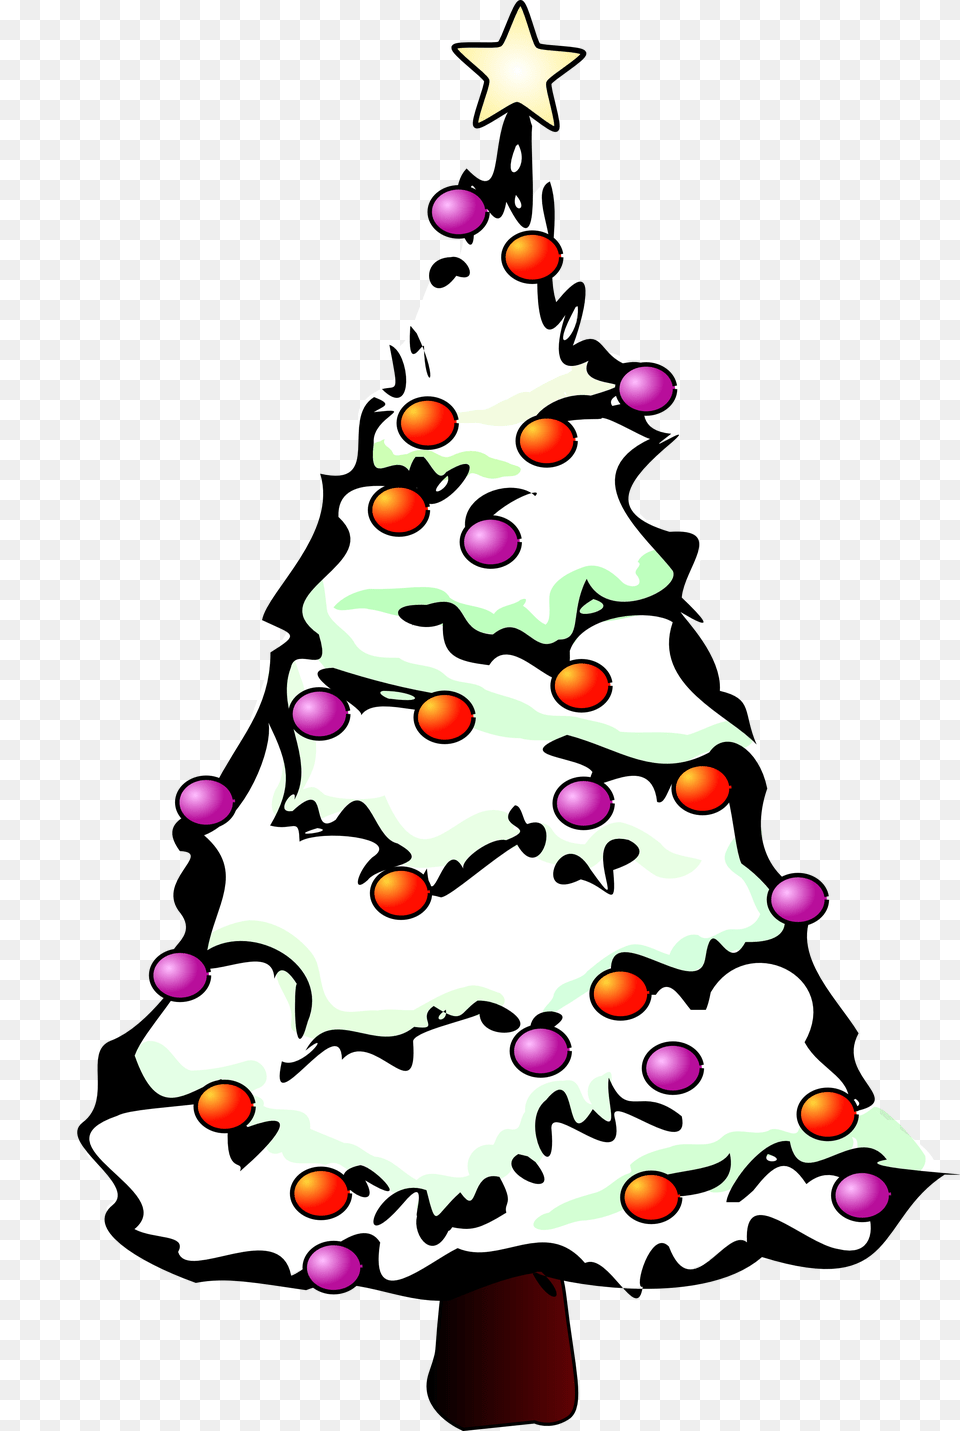 Christmas Tree Black And White Clipart Christmas Tree Clip Art, Christmas Decorations, Festival, Baby, Christmas Tree Png